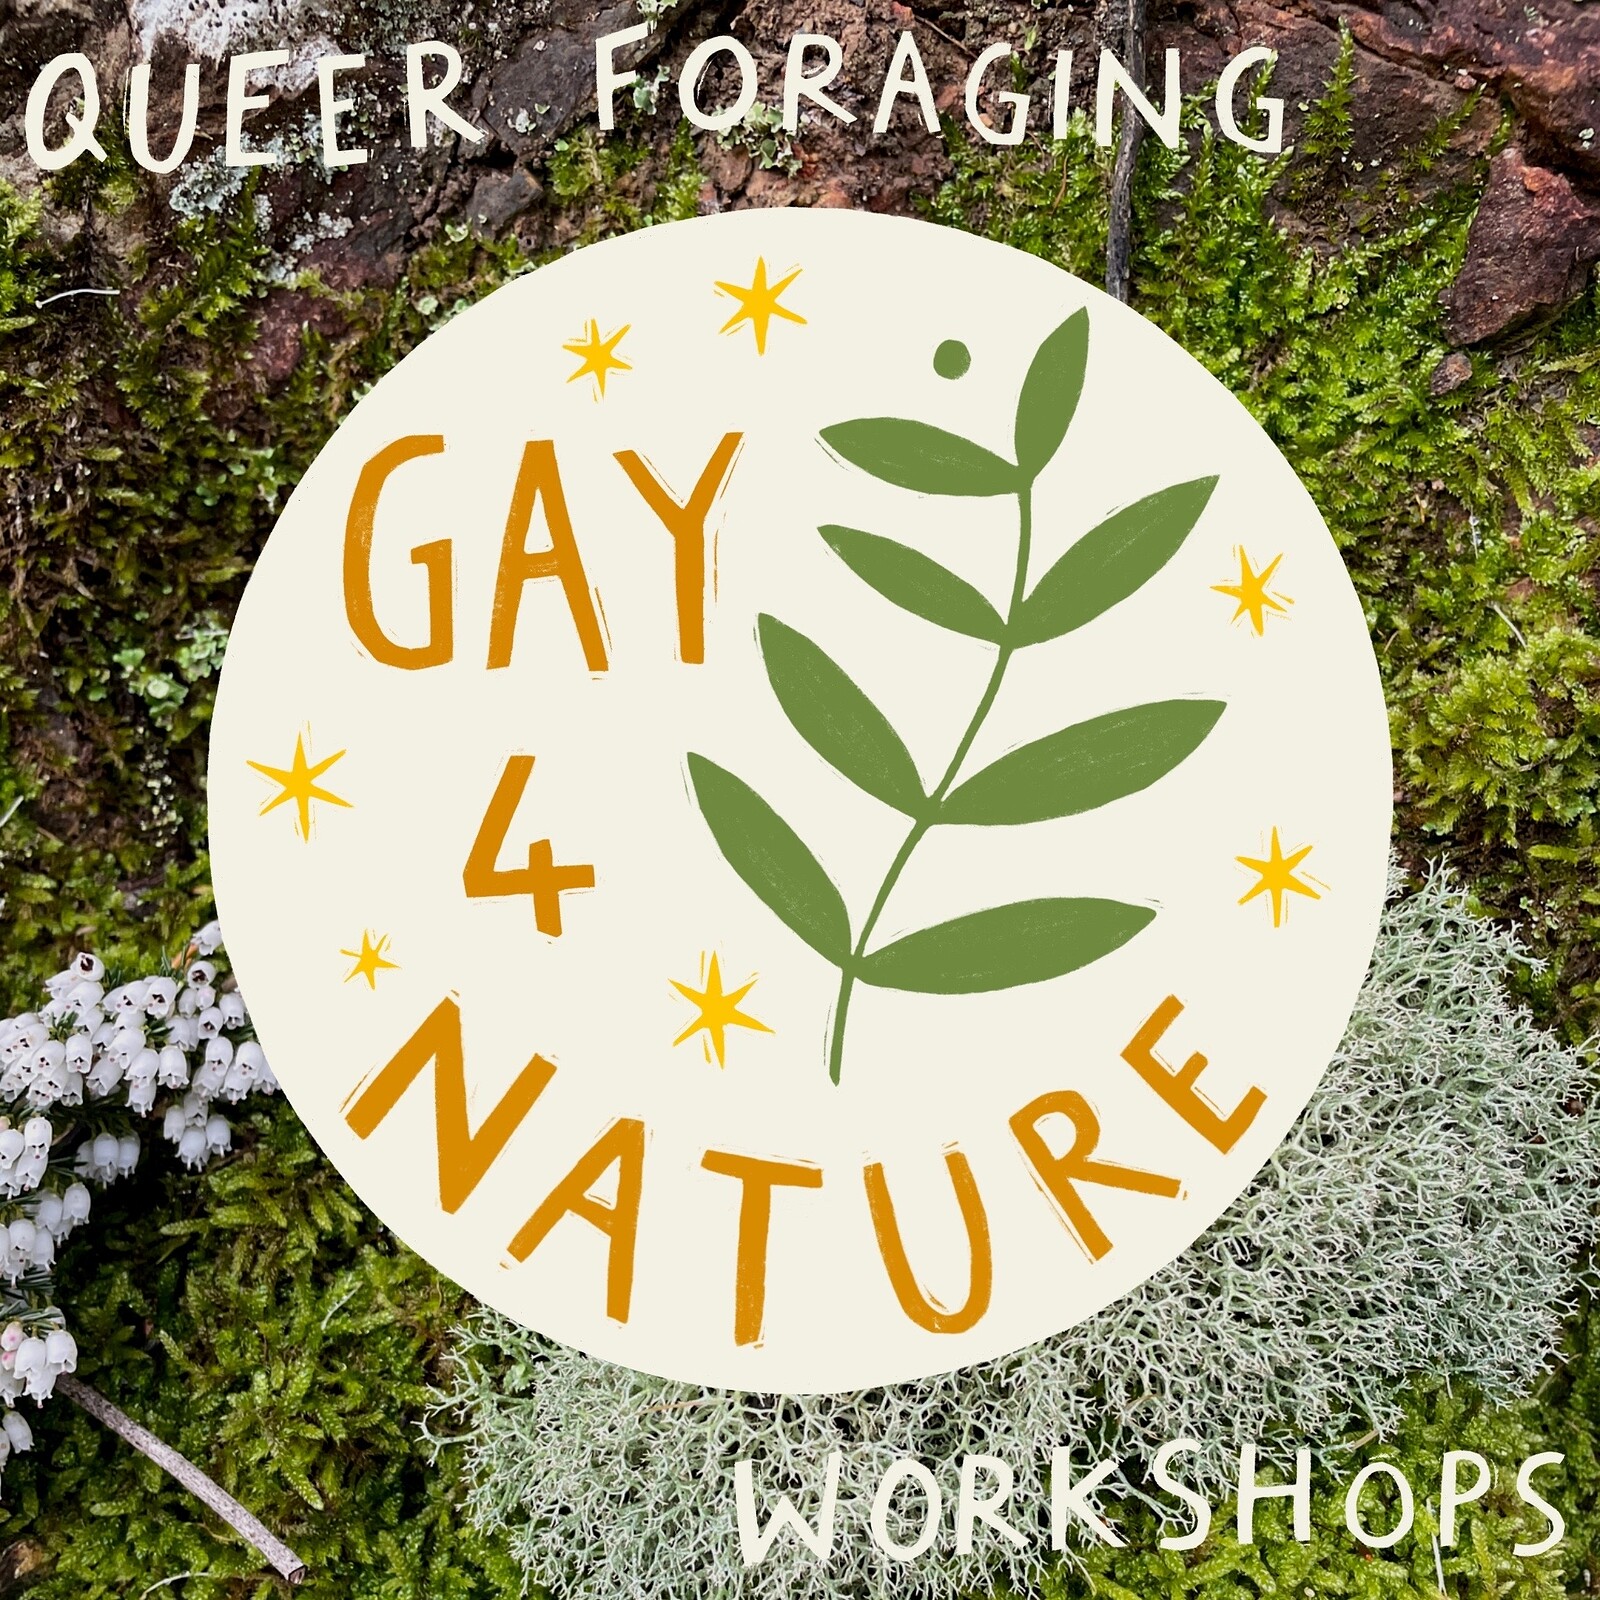 GAY FOR NATURE at Leigh Woods